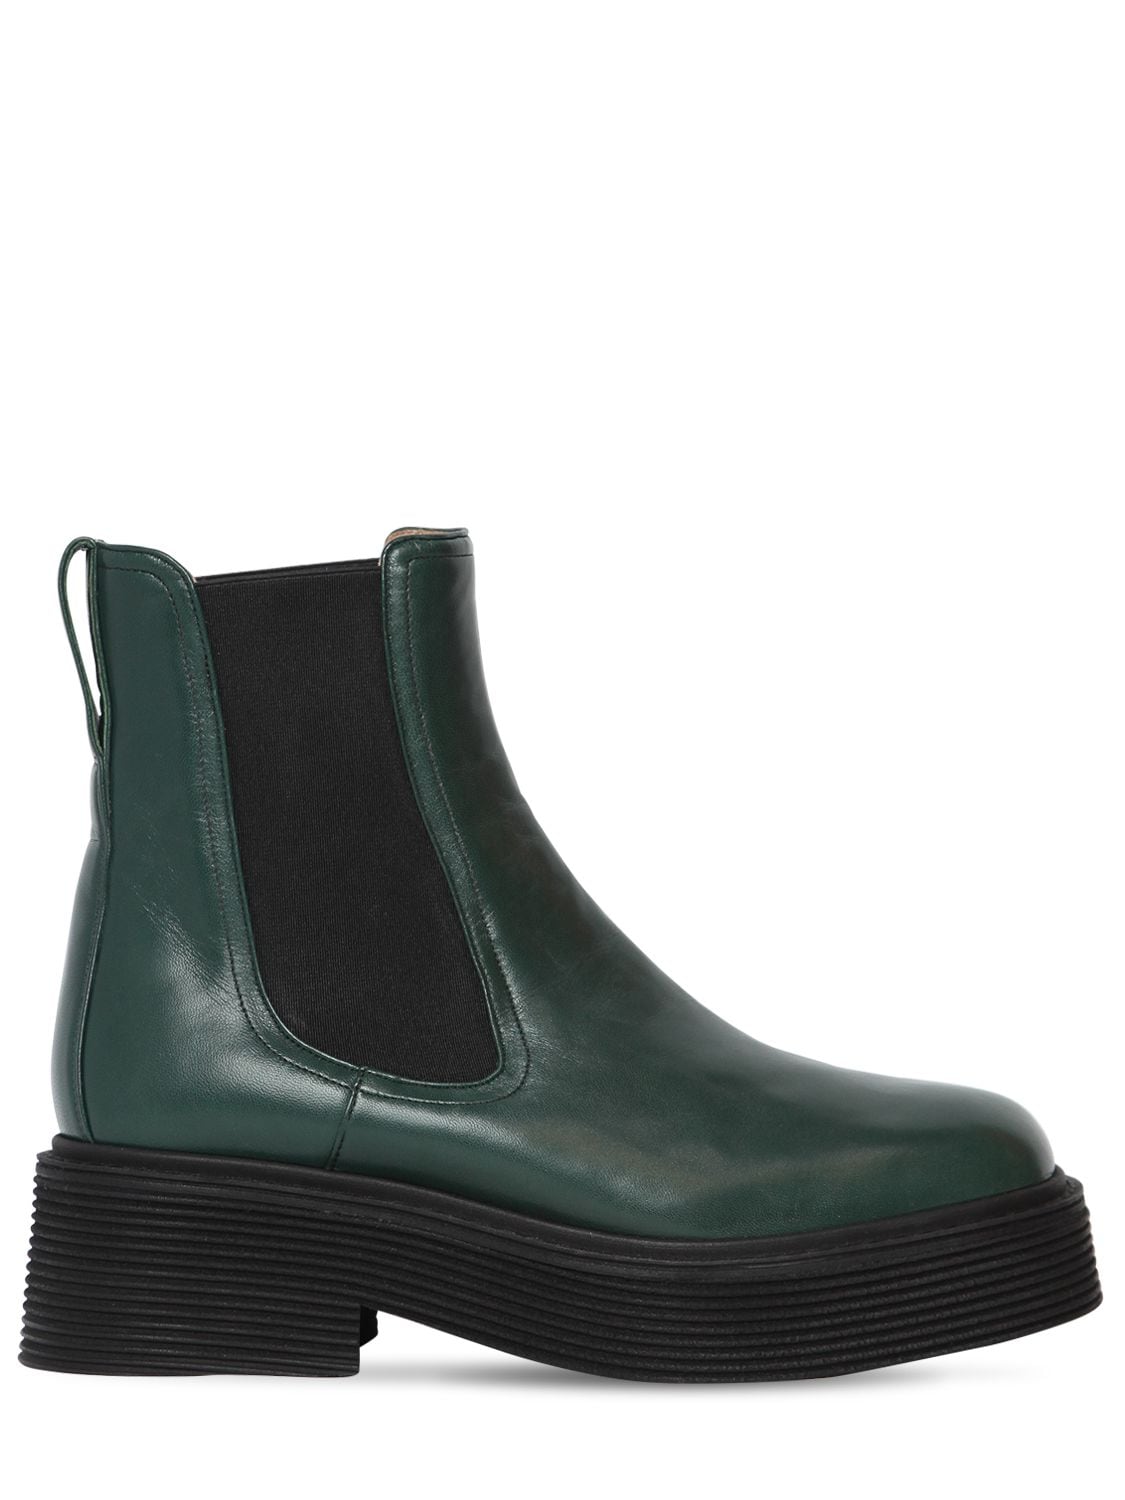 MARNI 40MM MILLERIGHE LEATHER ANKLE BOOTS,70I81K011-MDBWOTE1